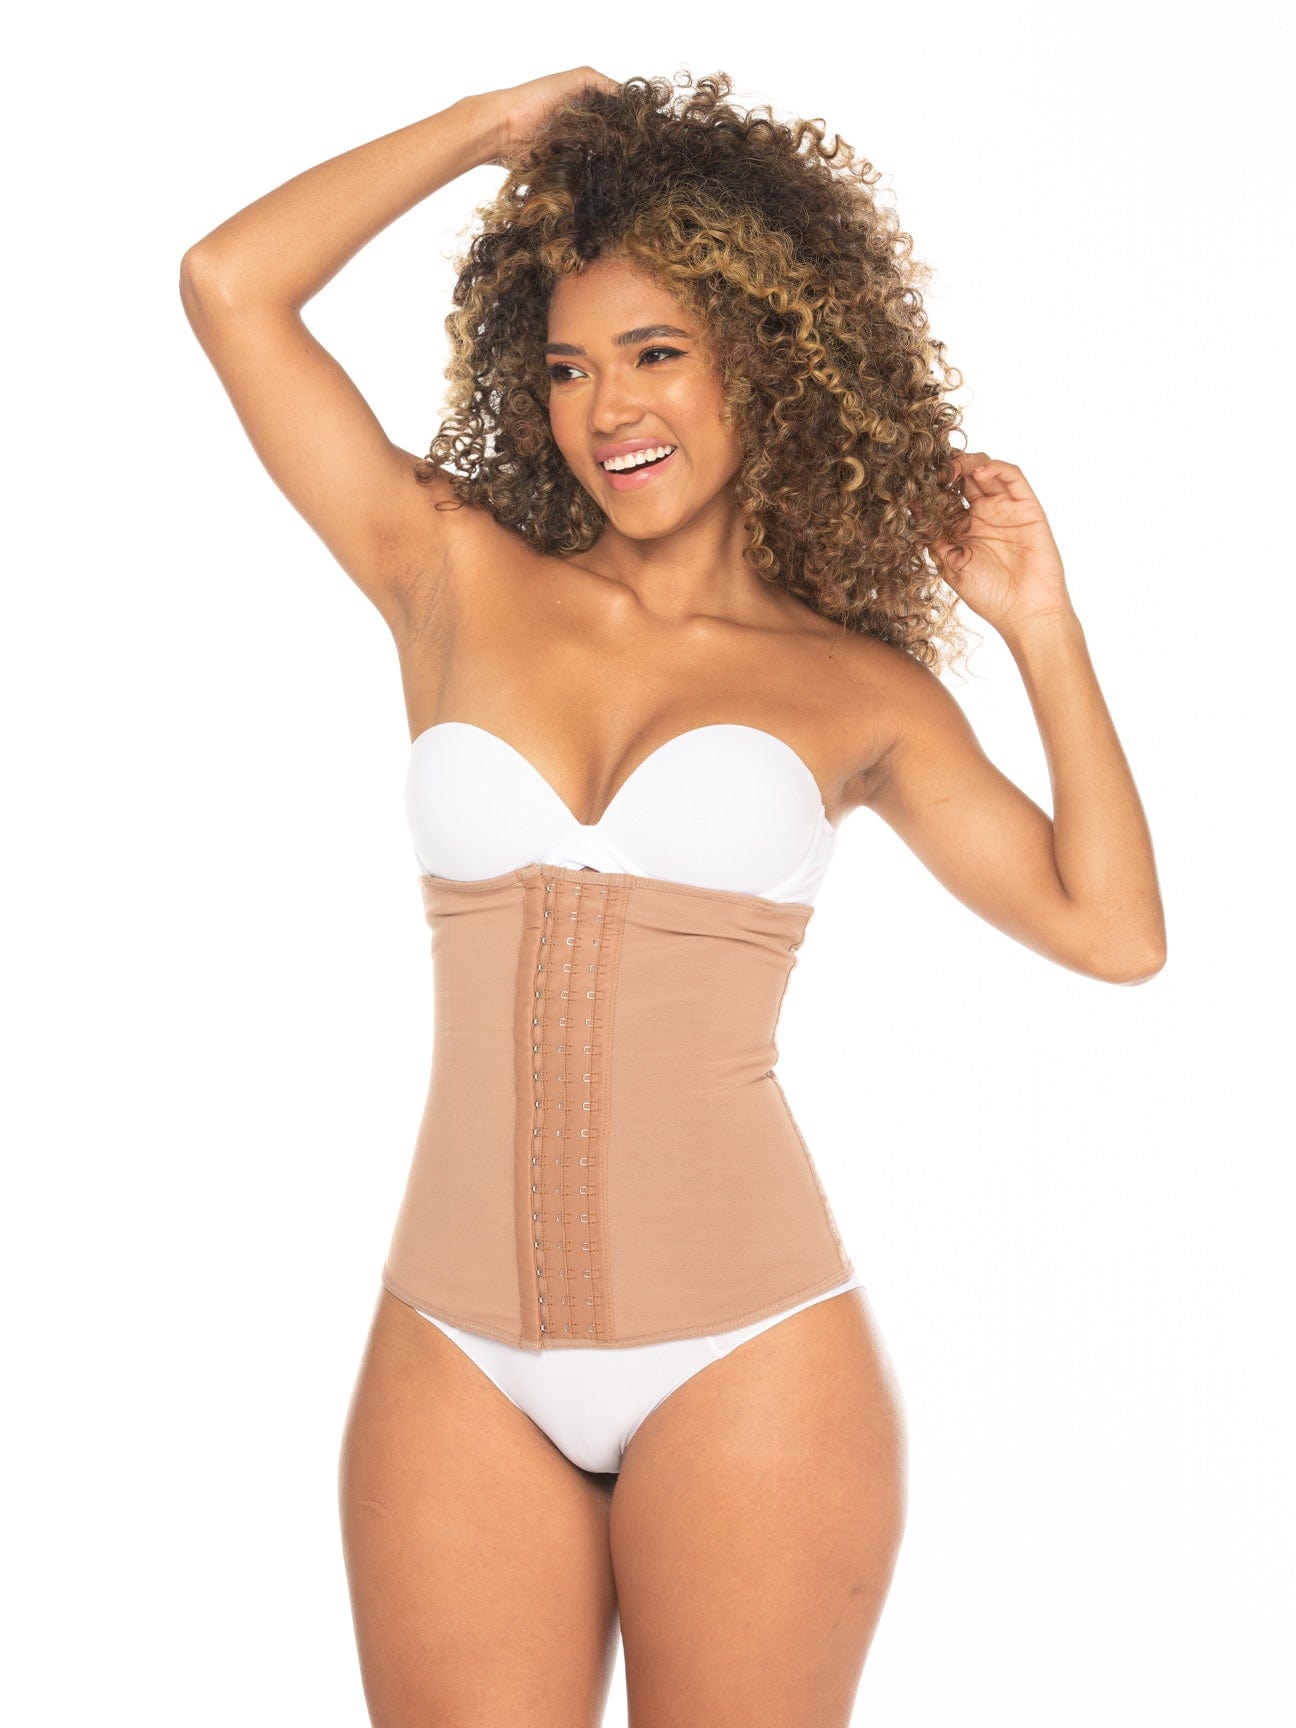 LadySlim by NuvoFit Fajas Colombiana Full Latex Chaleco Vest Waist Cincher  Trainer Trimmer Girdle Workout Corset Body Shaper, Beige, Small :  : Clothing, Shoes & Accessories